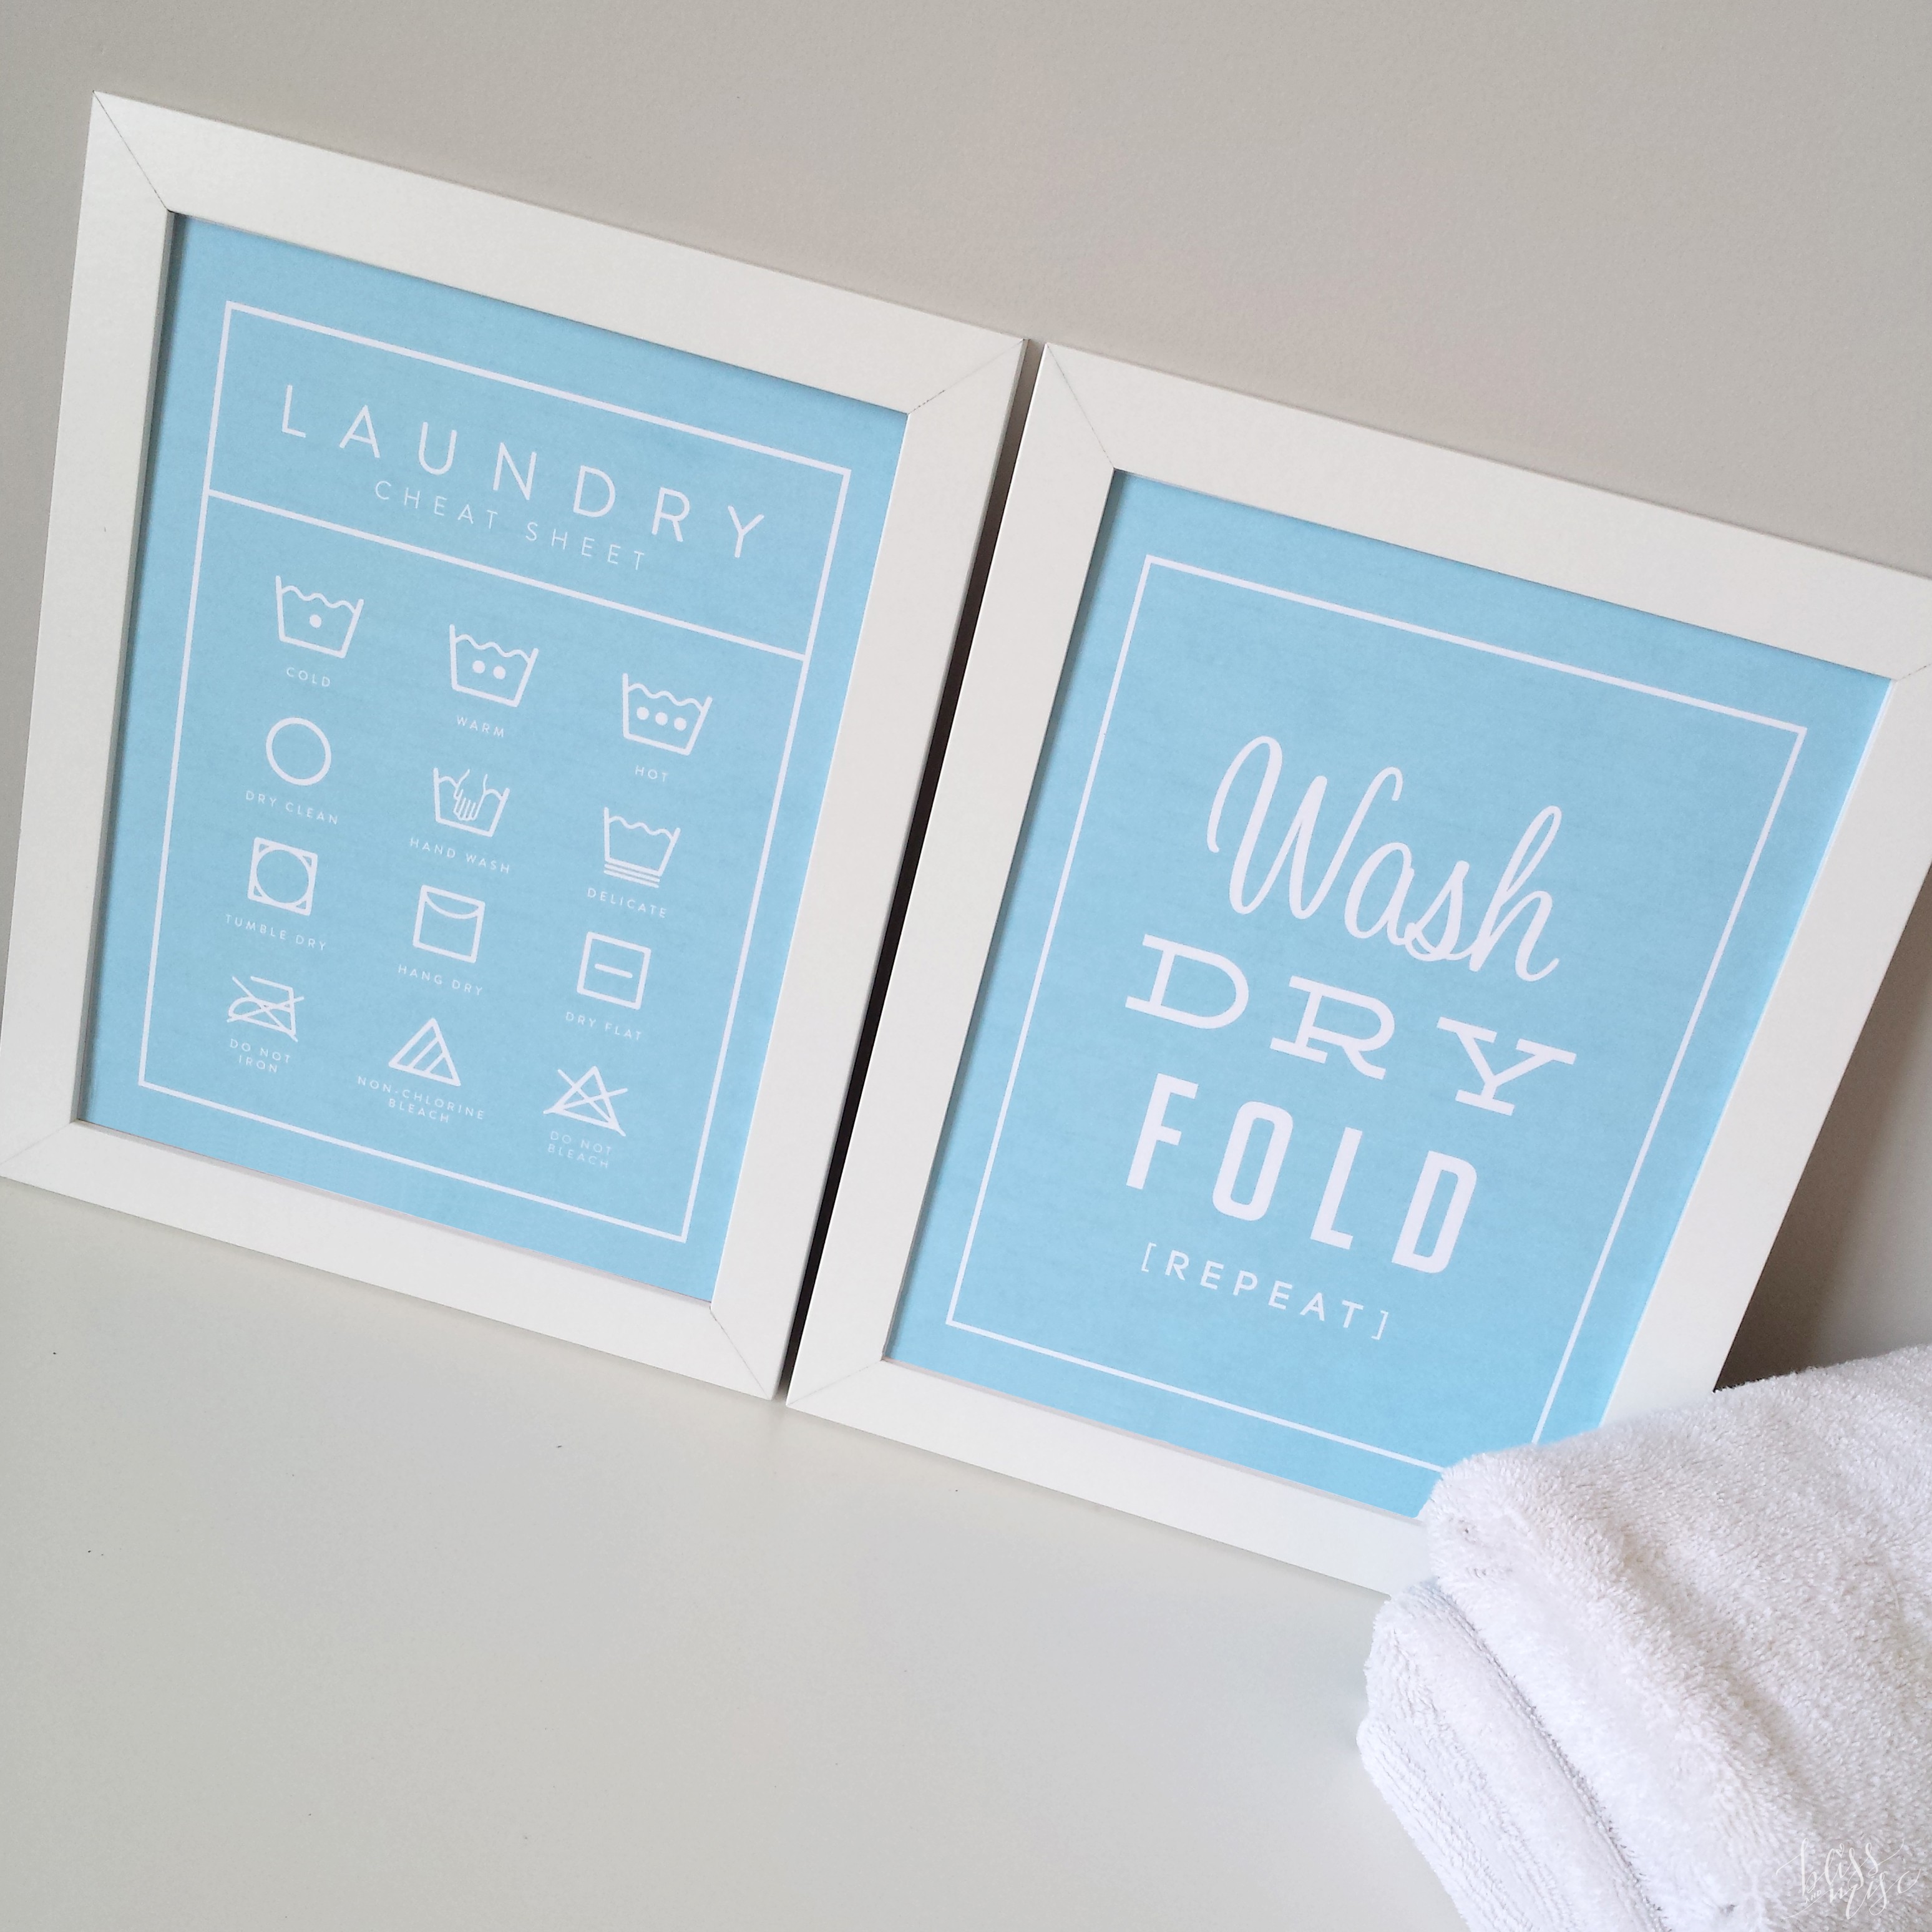 laundry-day-free-printables-bliss-miscellaneous